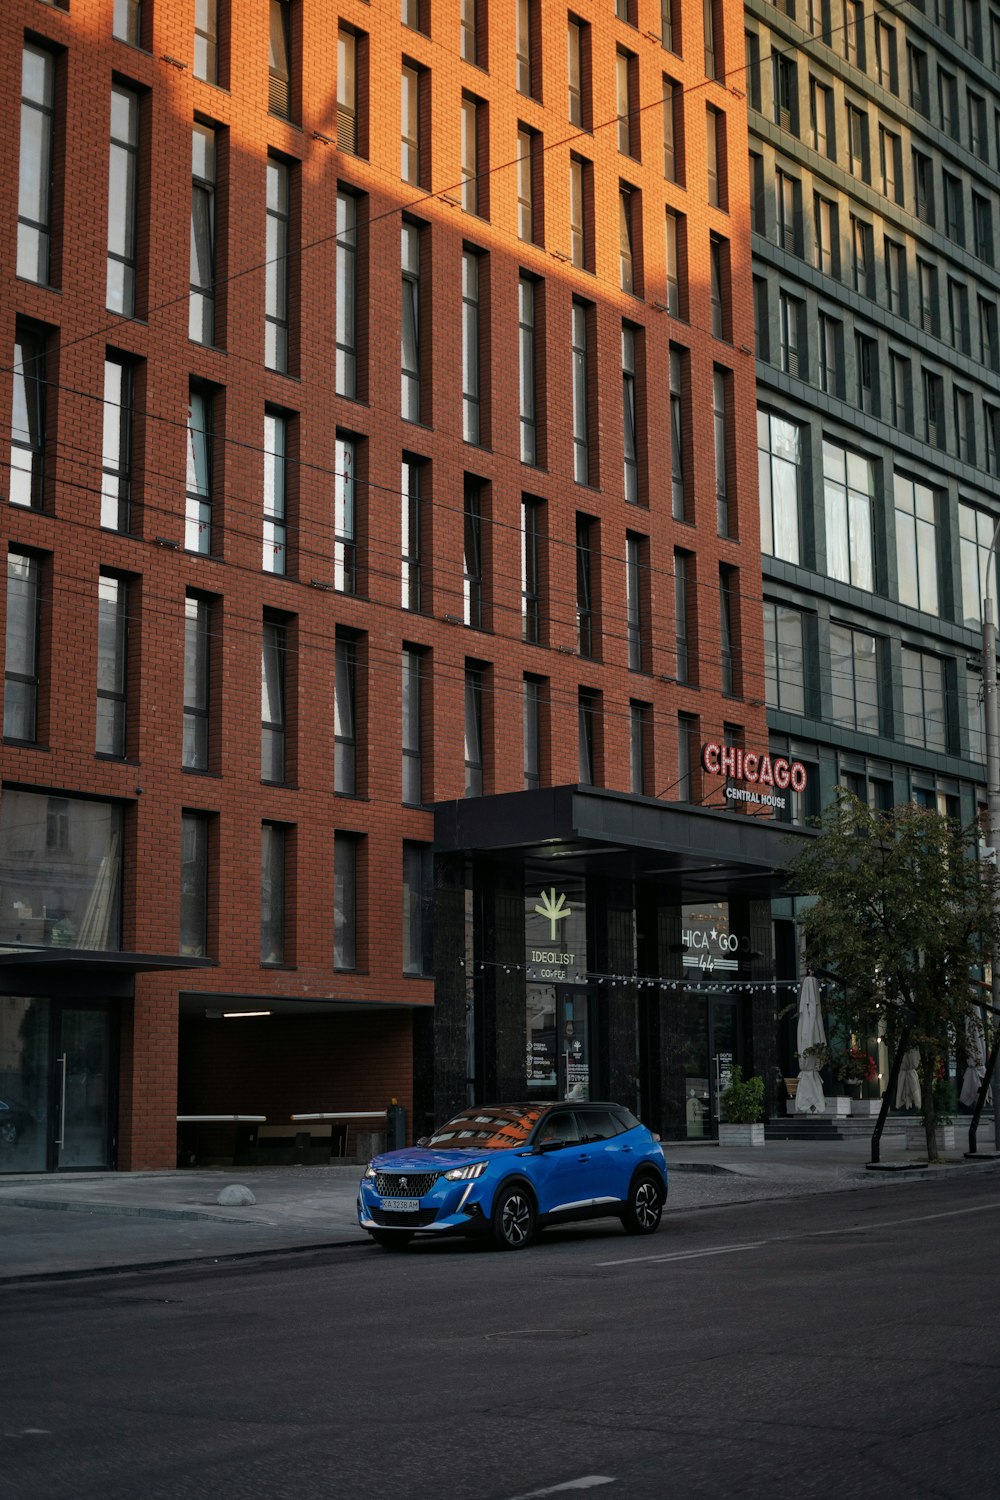 a blue car parked in front of a tall building